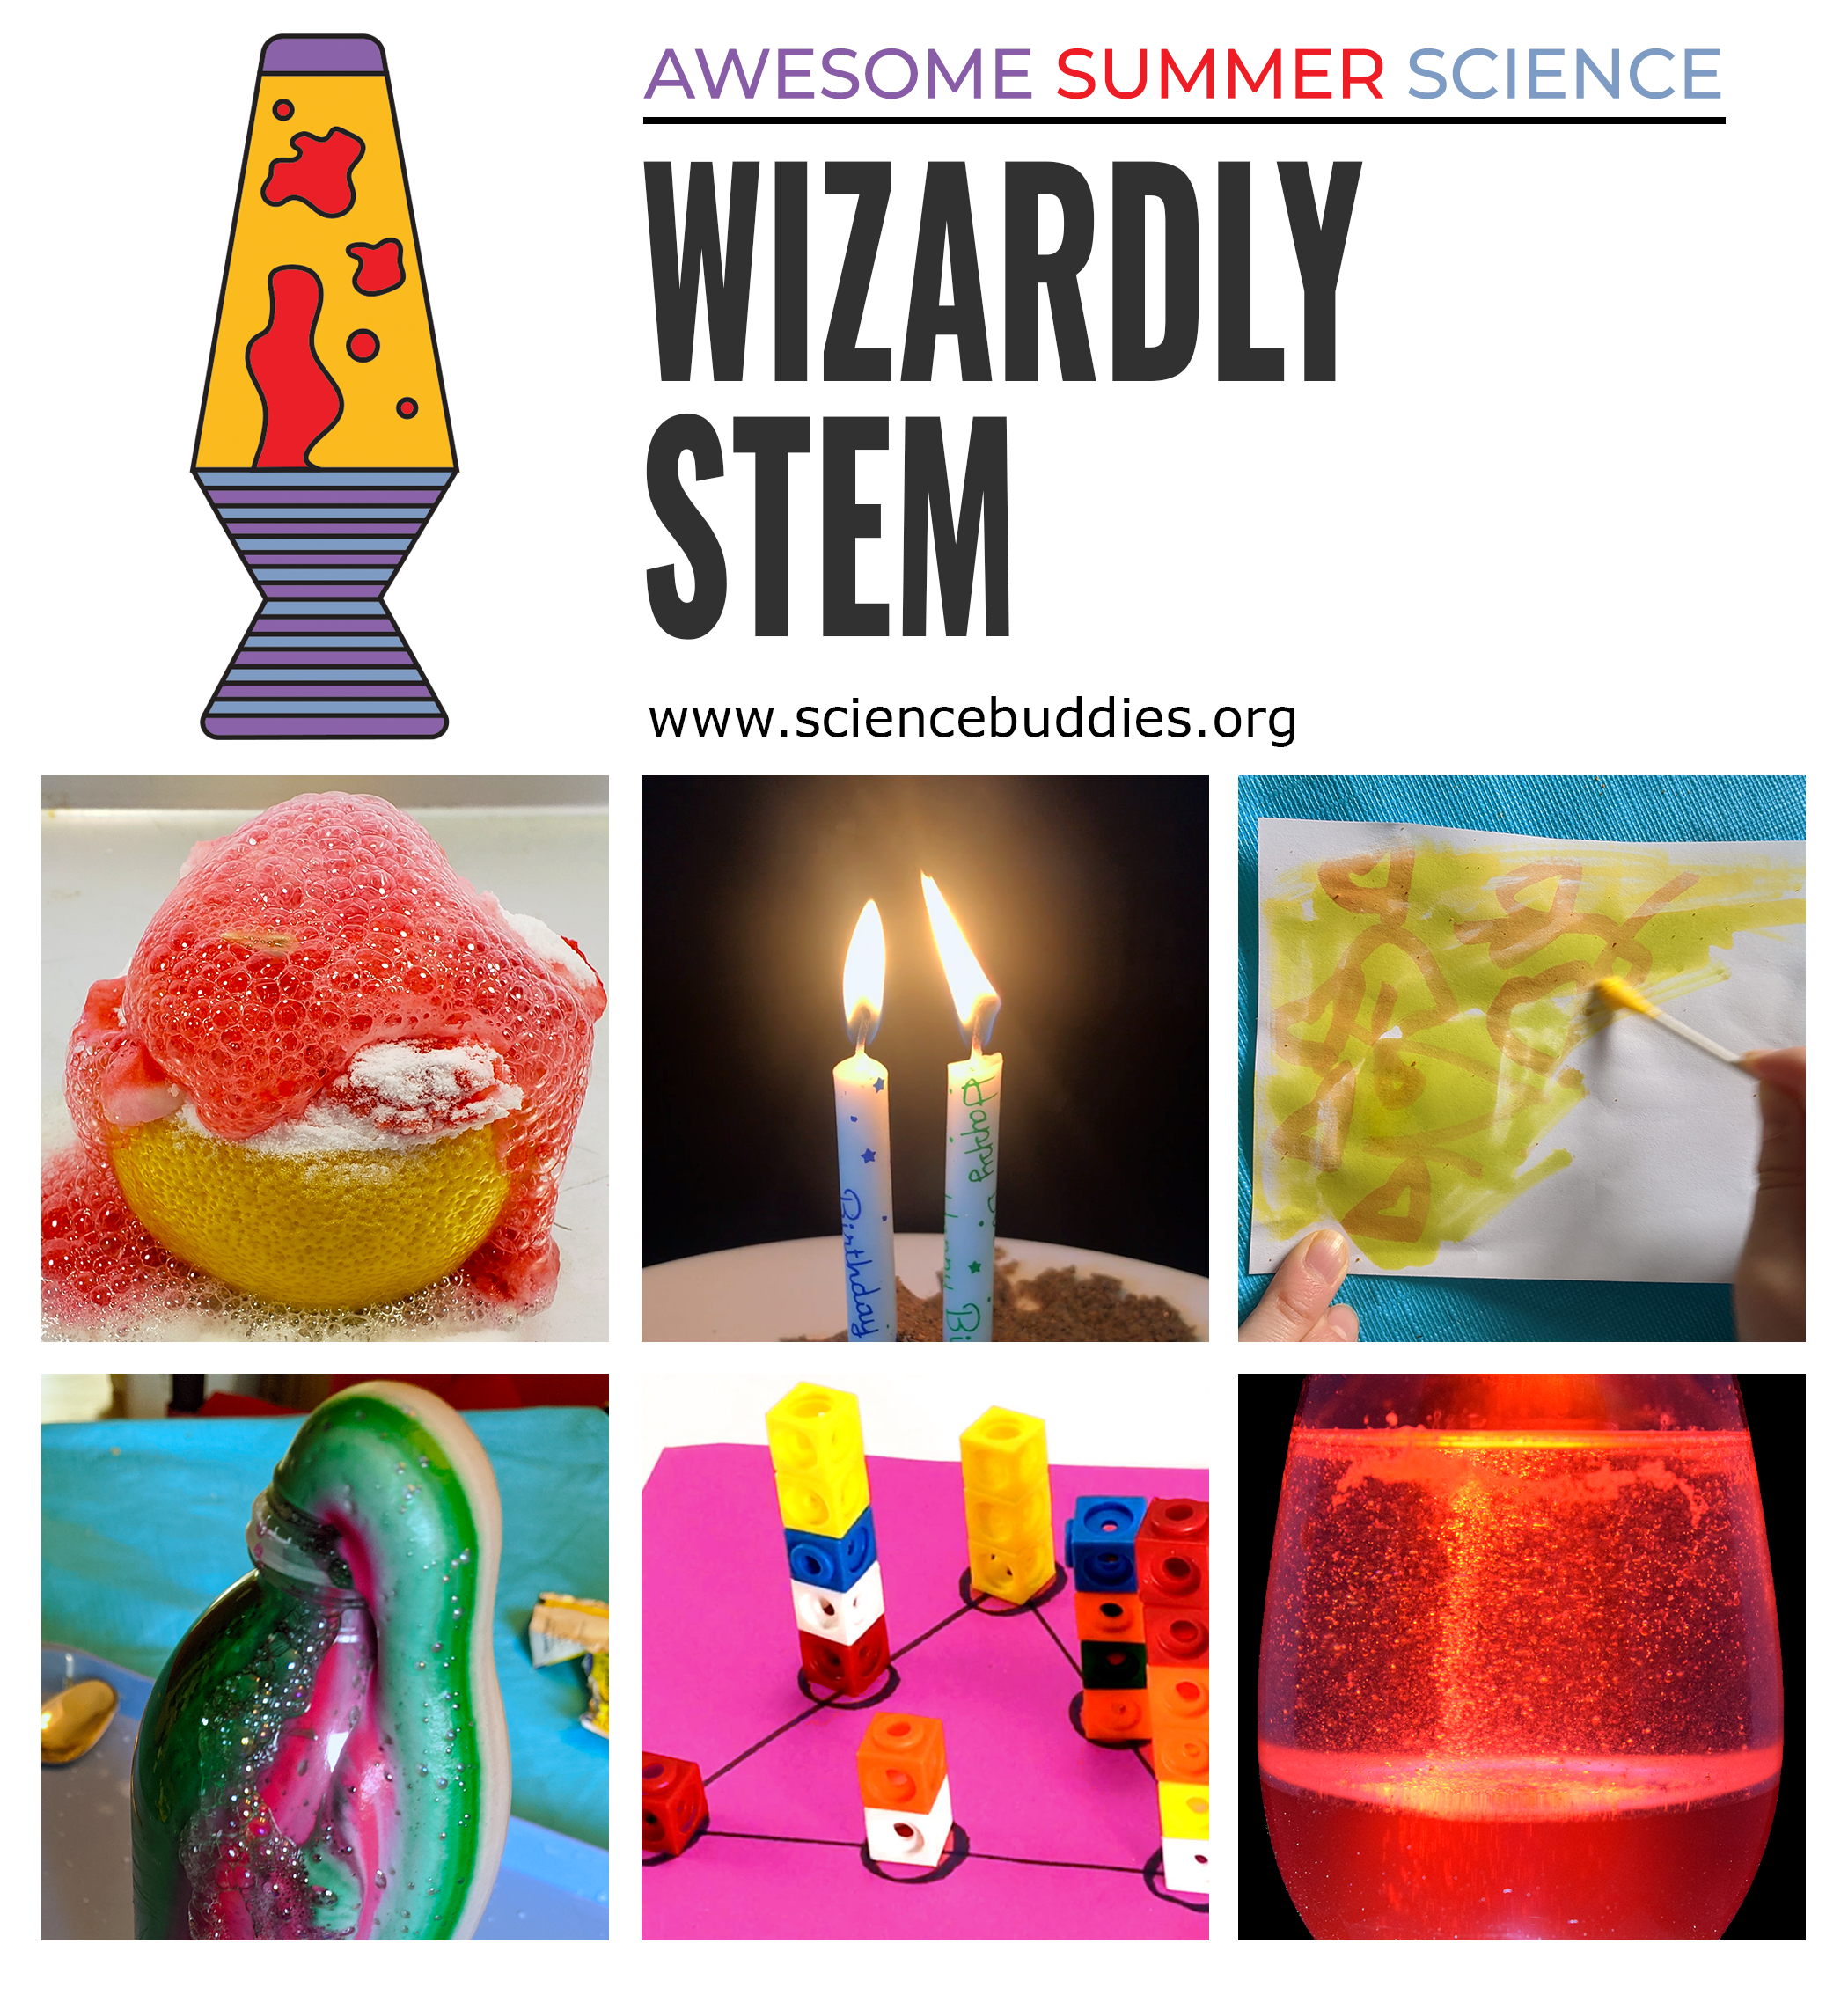 Bubbling lava lamp, jumping candle flame, lemon volcano, and more for Wizardly STEM - Week 3 of Awesome Summer Science Experiments with Science Buddies